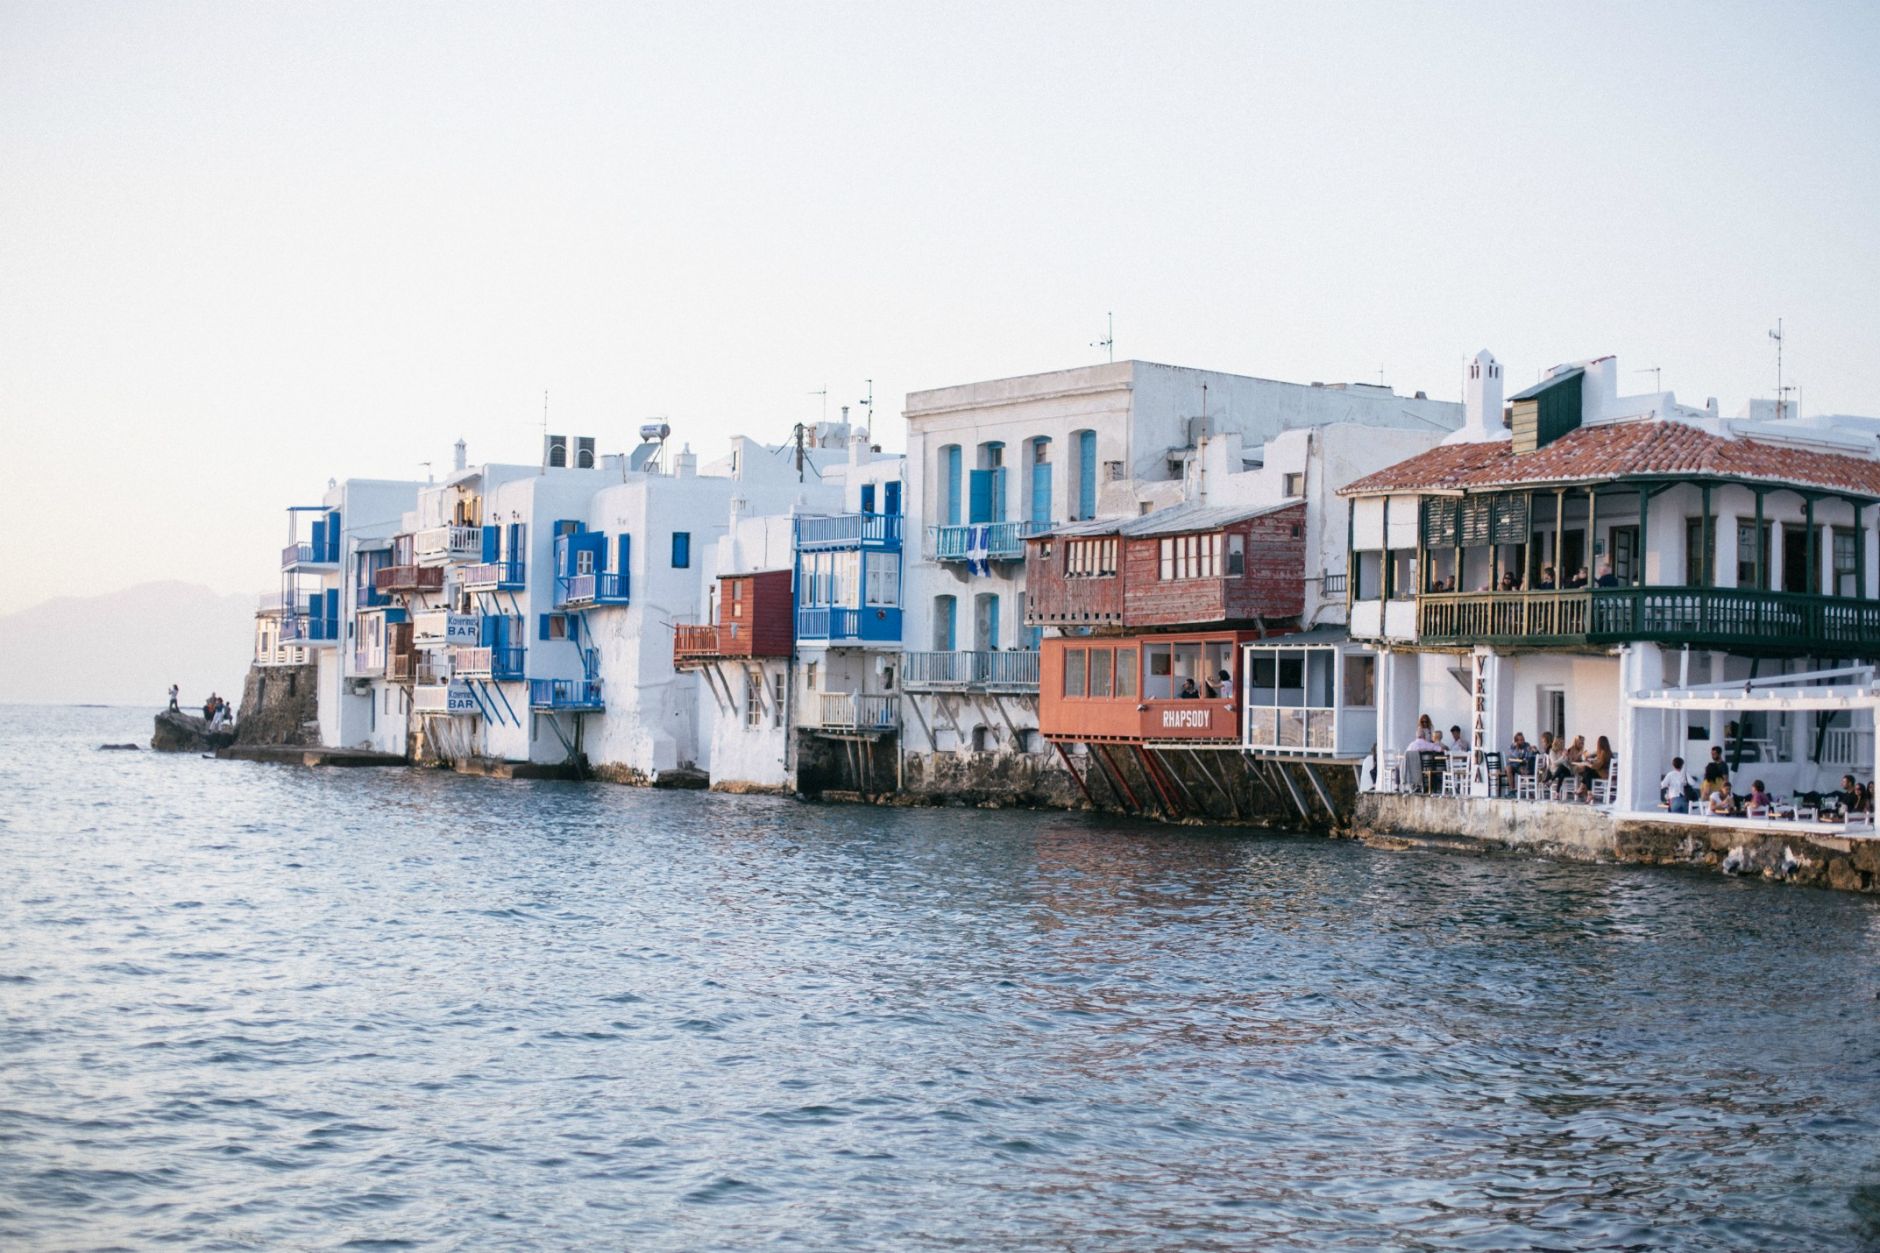 WHAT TO DO IN MYKONOS FOR THREE DAYS?